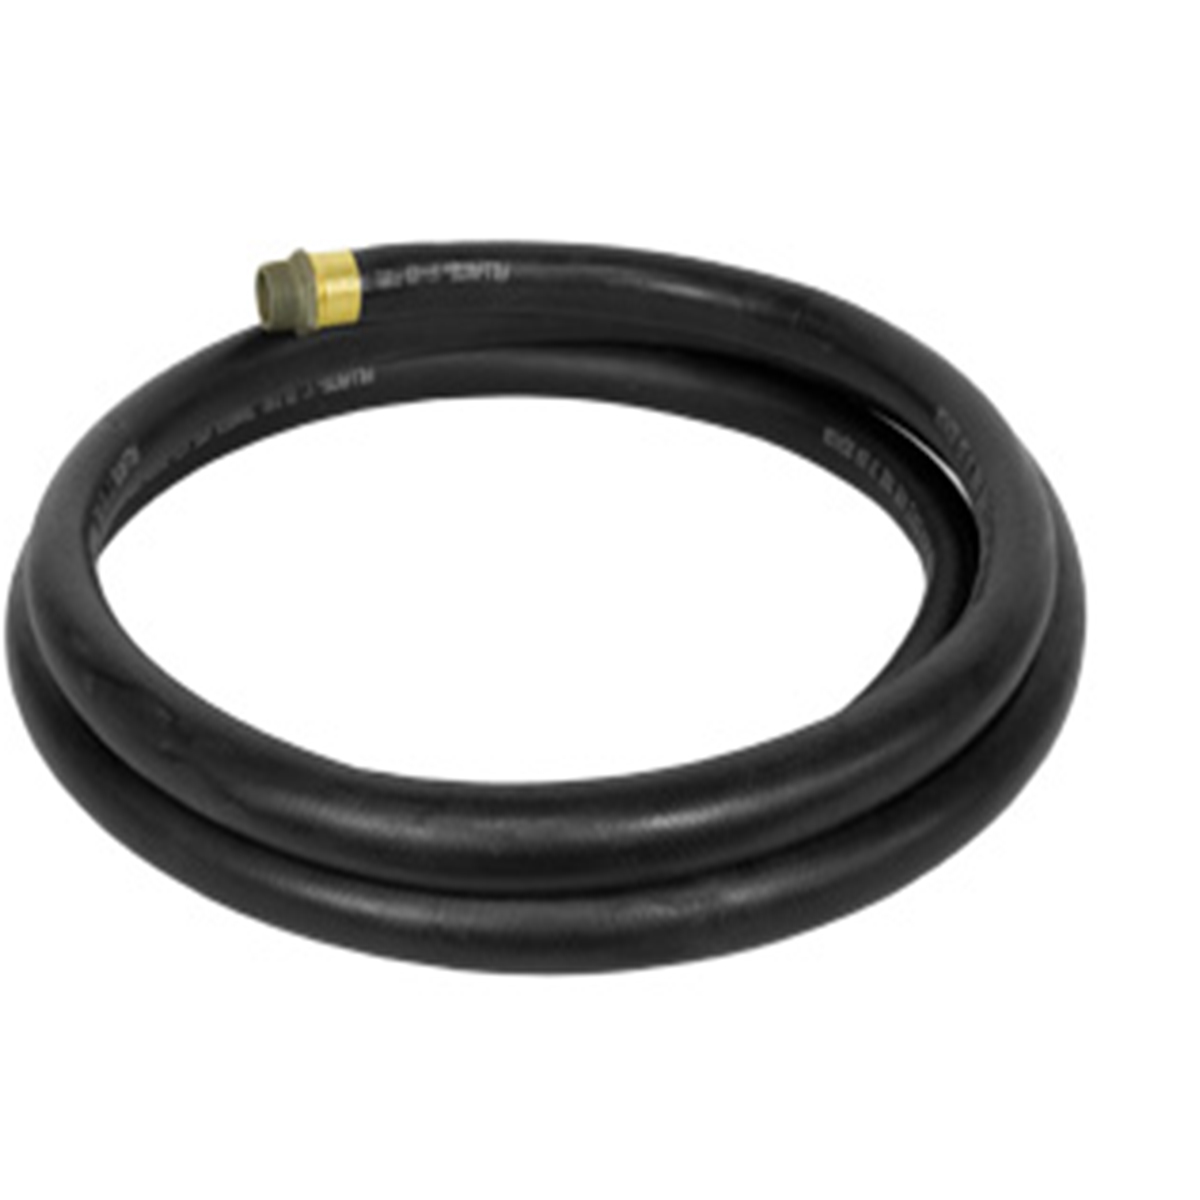 Fill-Rite Retail Hose - 1-in x 14-ft